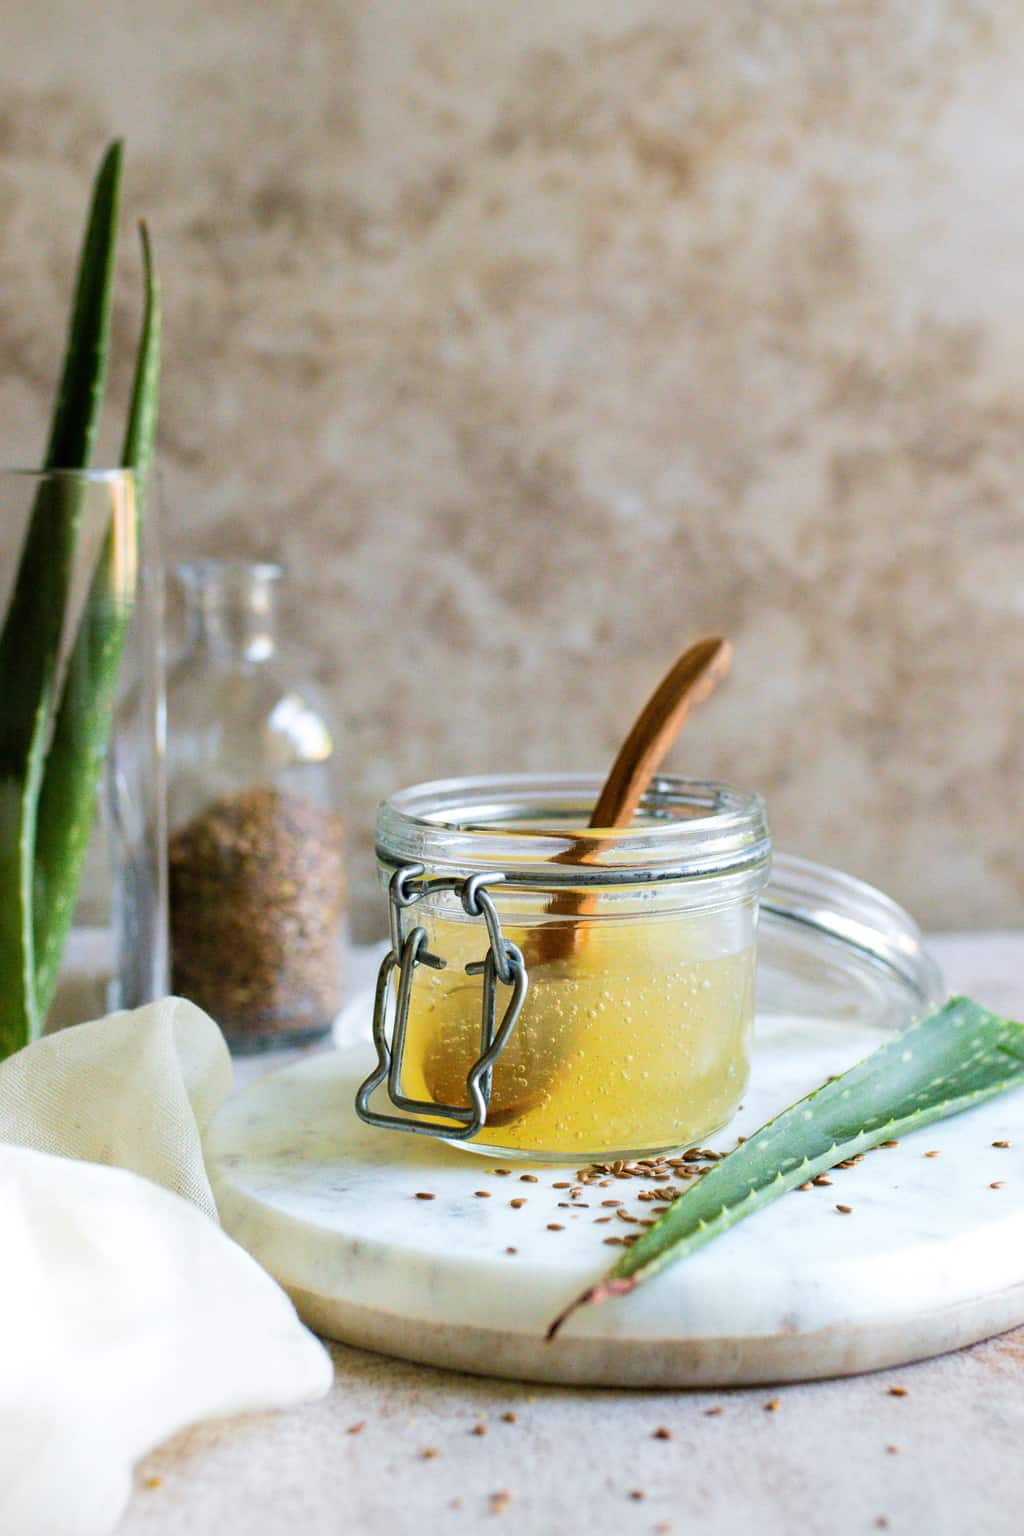 This 3-ingredient flaxseed gel lifts fine hair and tames frizz, all while nourishing locks from the outside in